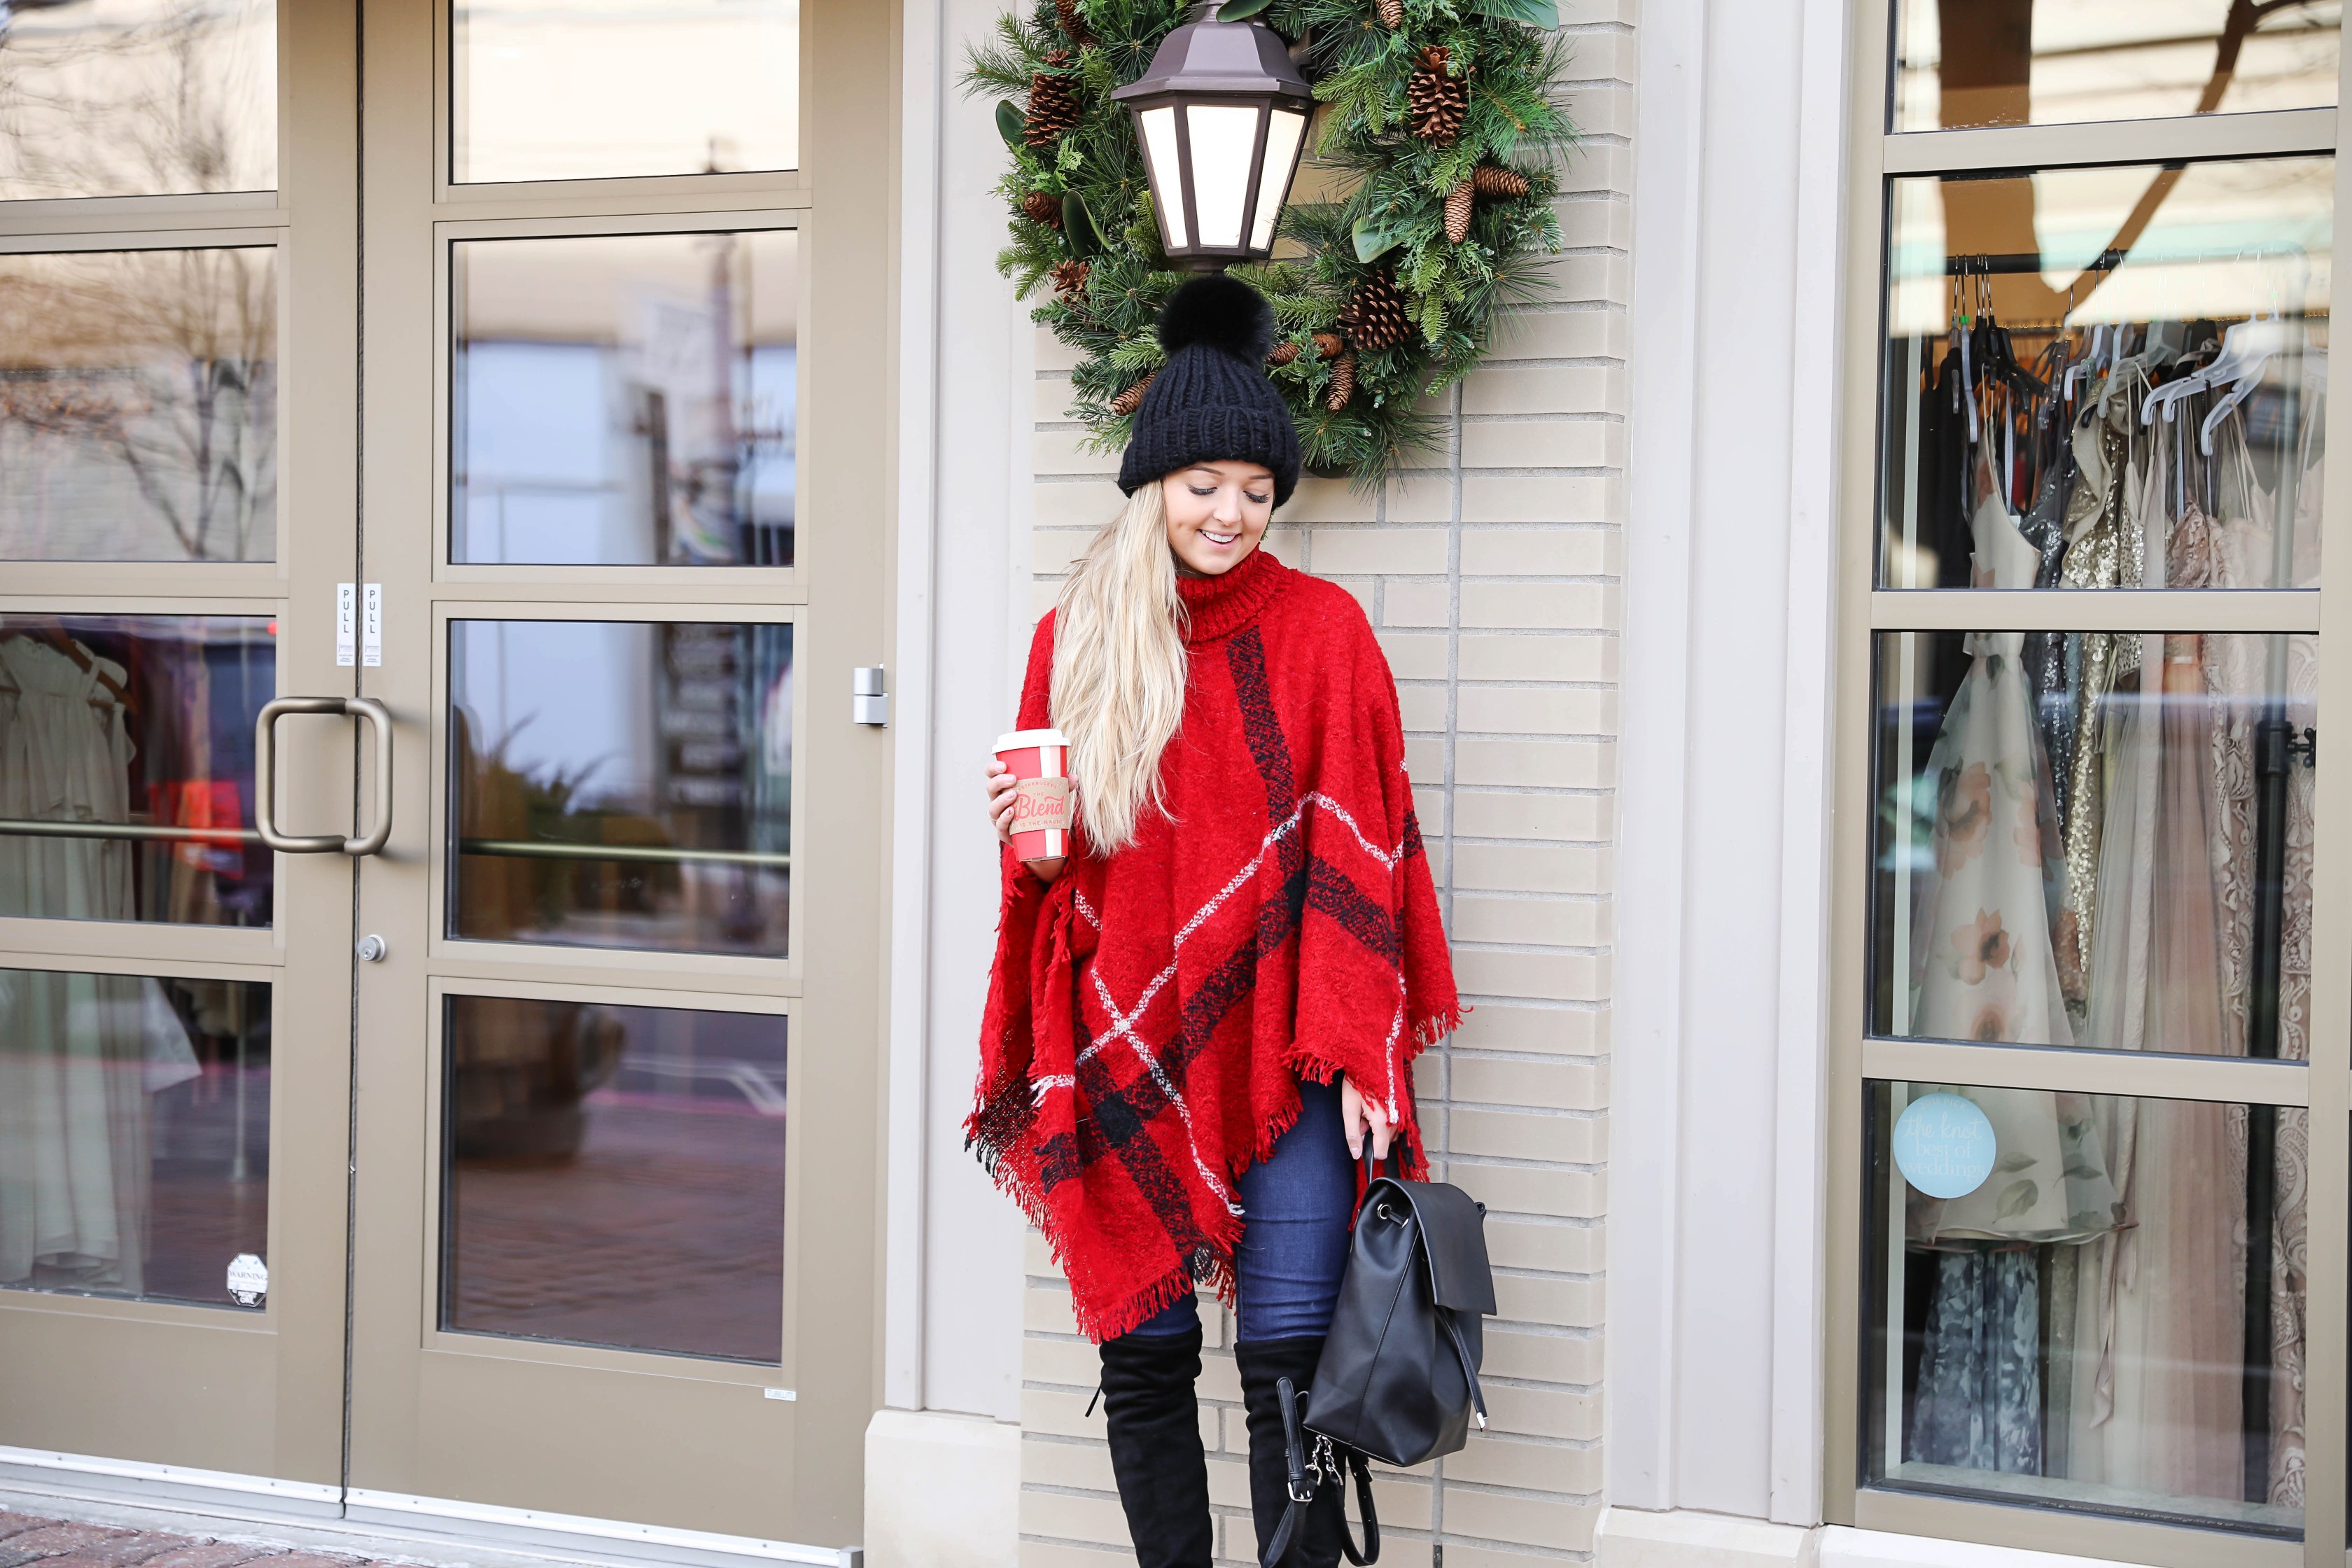 Red plaid Christmas poncho with the cutest turtleneck! I got this cute outfit from the Pink Lily Boutique! I love winter fashion, this holiday outfit would make for a cute Christmas look! Details on the blog daily dose of charm by lauren lindmark